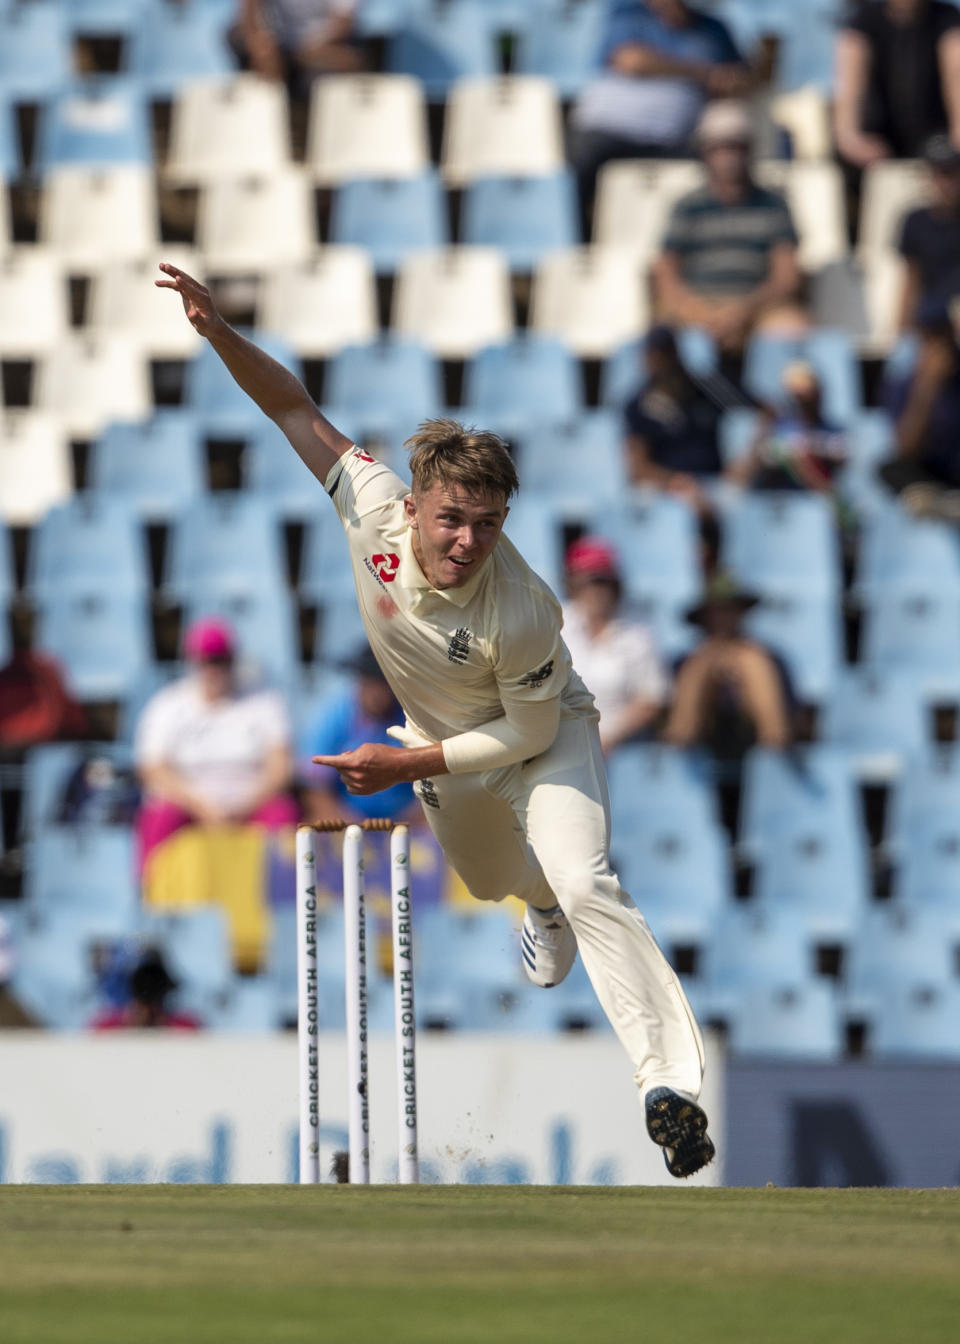 England's bowler Sam Curran watches his delivery on day one of the first cricket test match between South Africa and England at Centurion Park, Pretoria, South Africa, Thursday, Dec. 26, 2019. (AP Photo/Themba Hadebe)